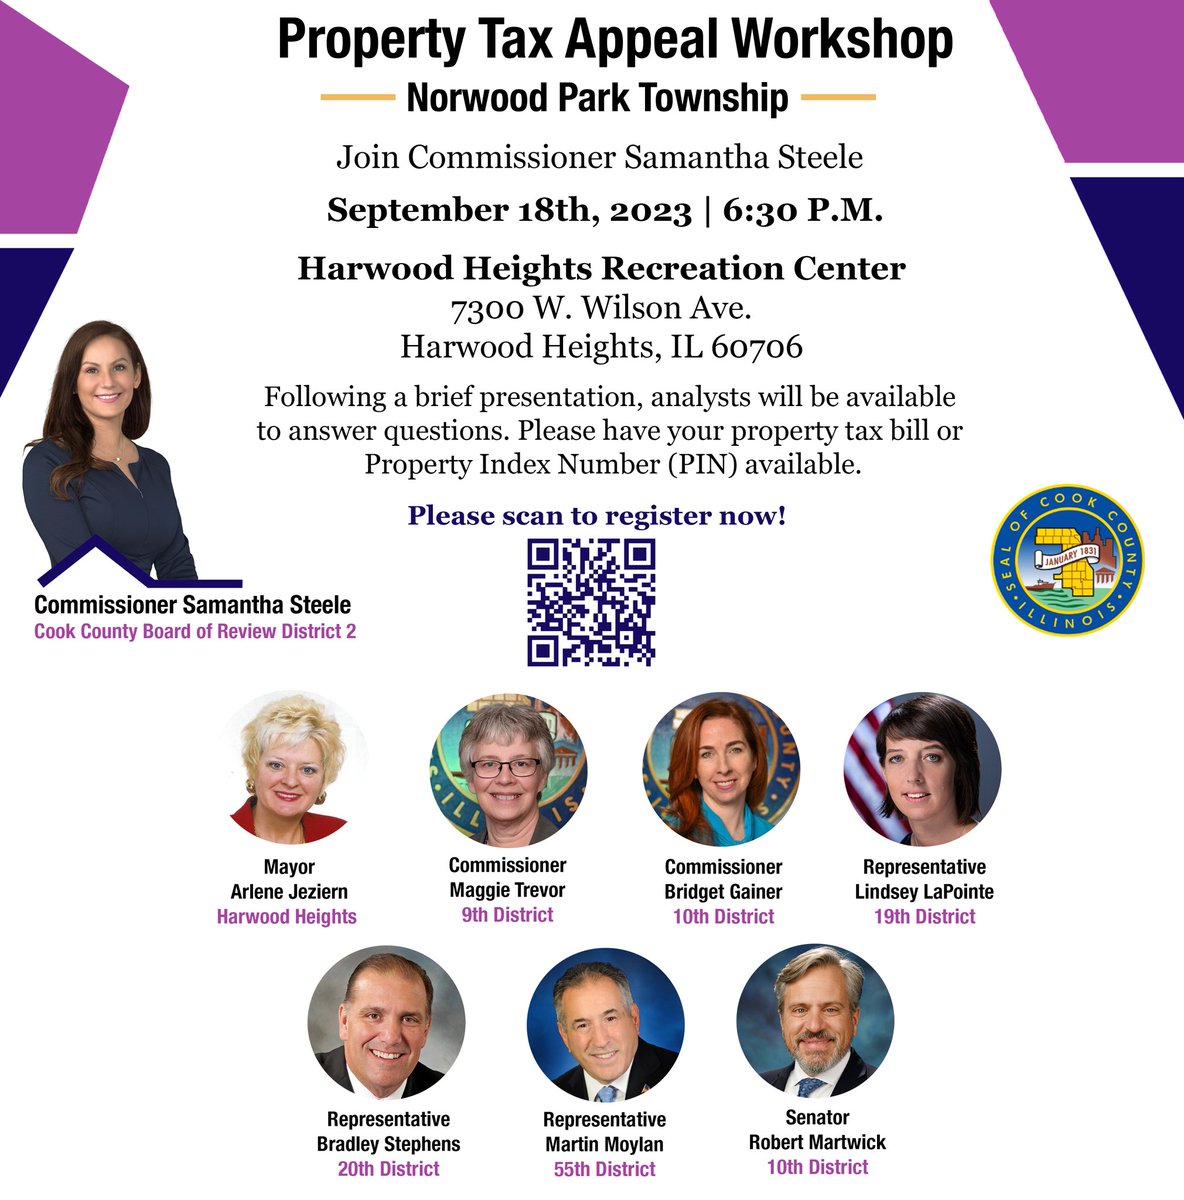 Attention 10th District residents- Join @Sam_Steele_BOR for a Property Tax Appeals Workshop on Monday, September 18th at the Harwood Heights Rec Center. Come out and get your tax appeal questions answered!